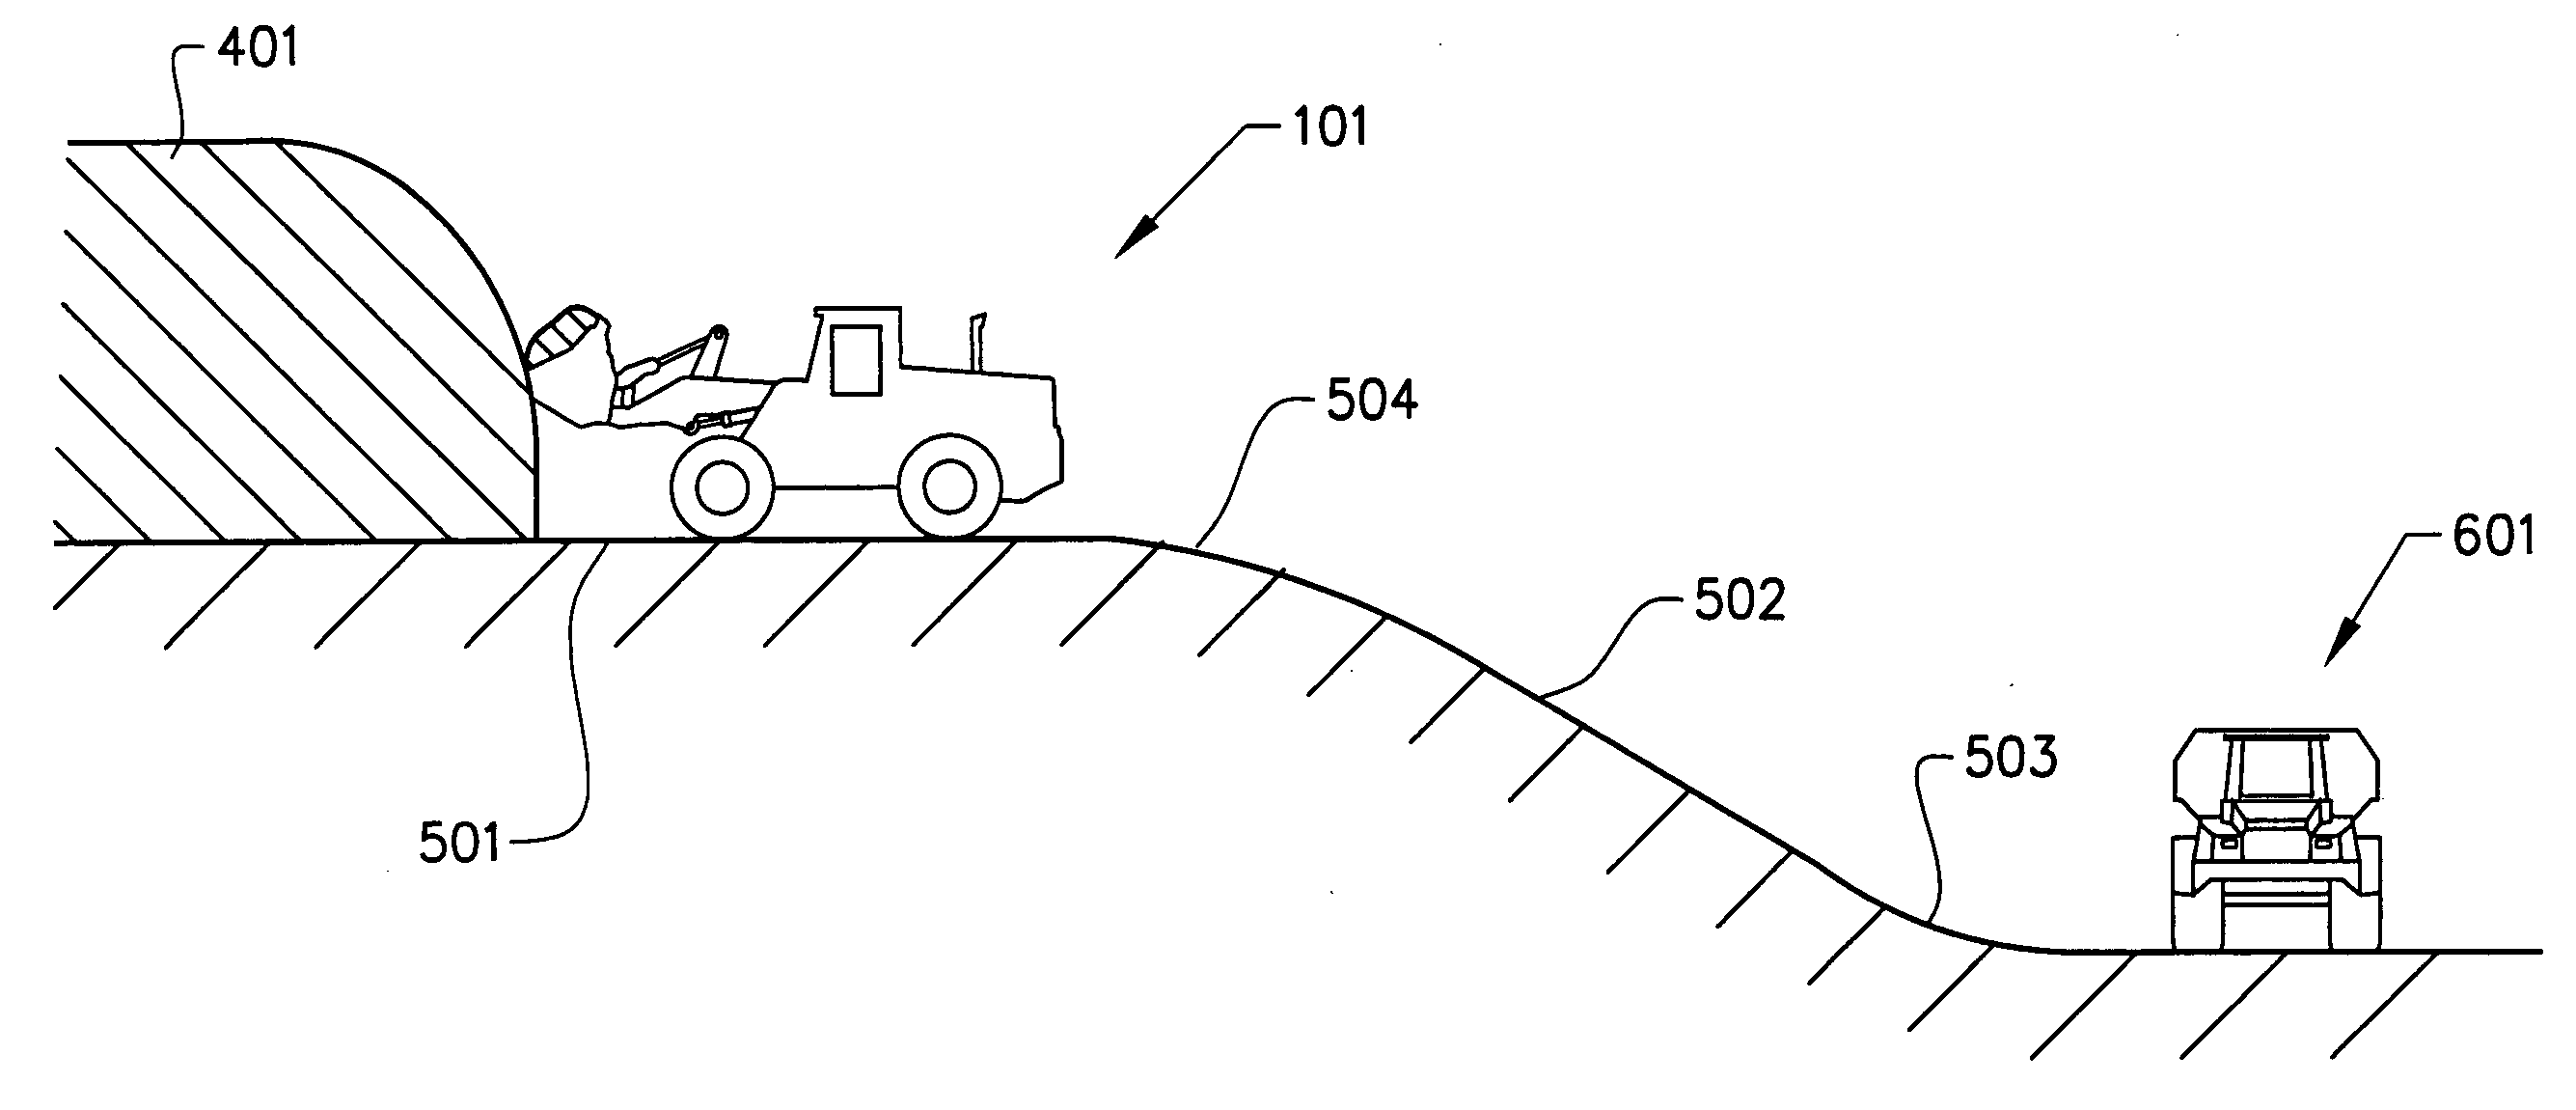 Method for controlling a work machine during operation in a repeated work cycle